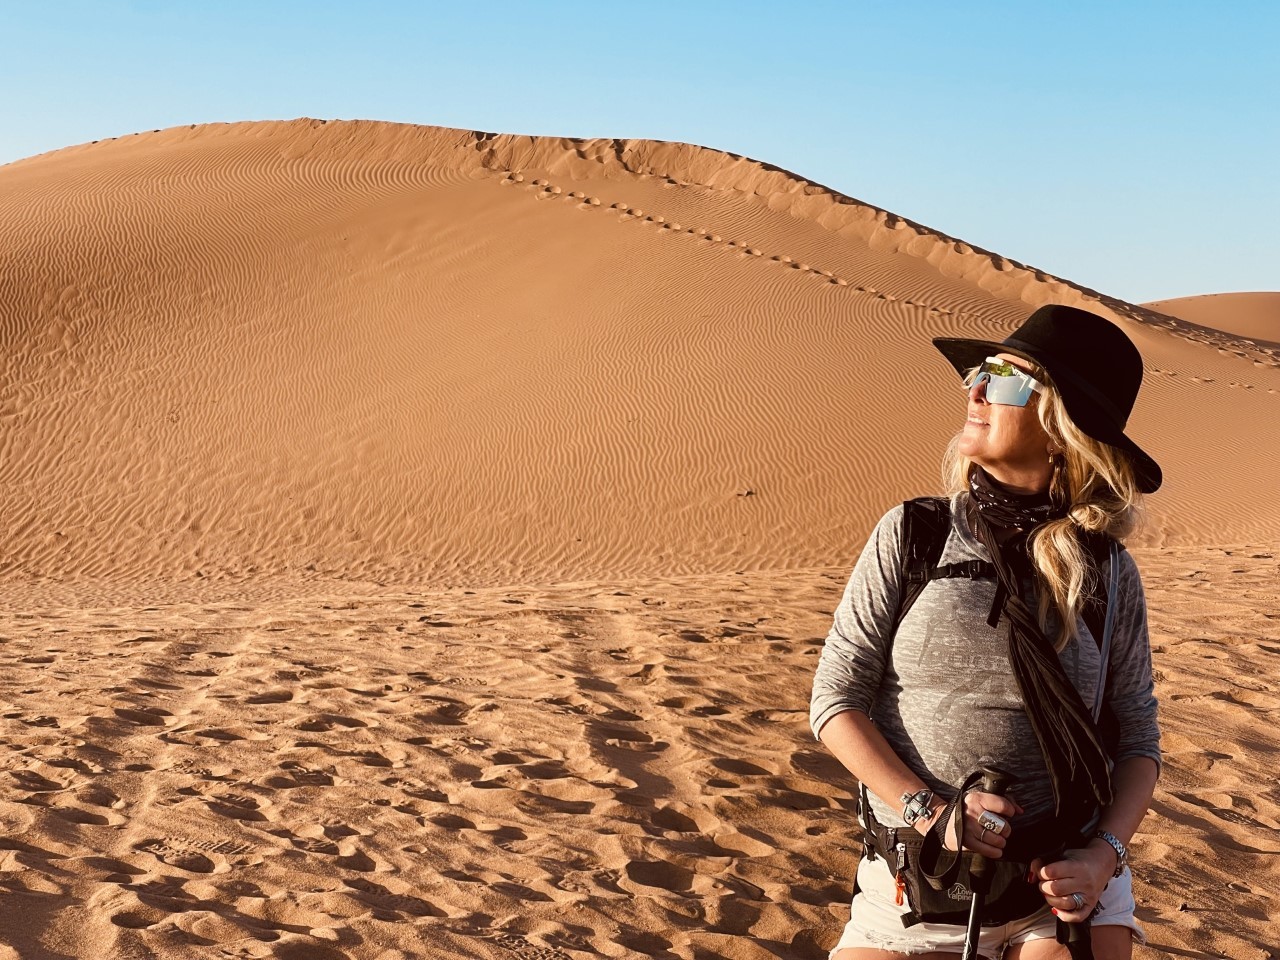 Jules Peters said she may be back in Wales but her heart is still in the Sahara.